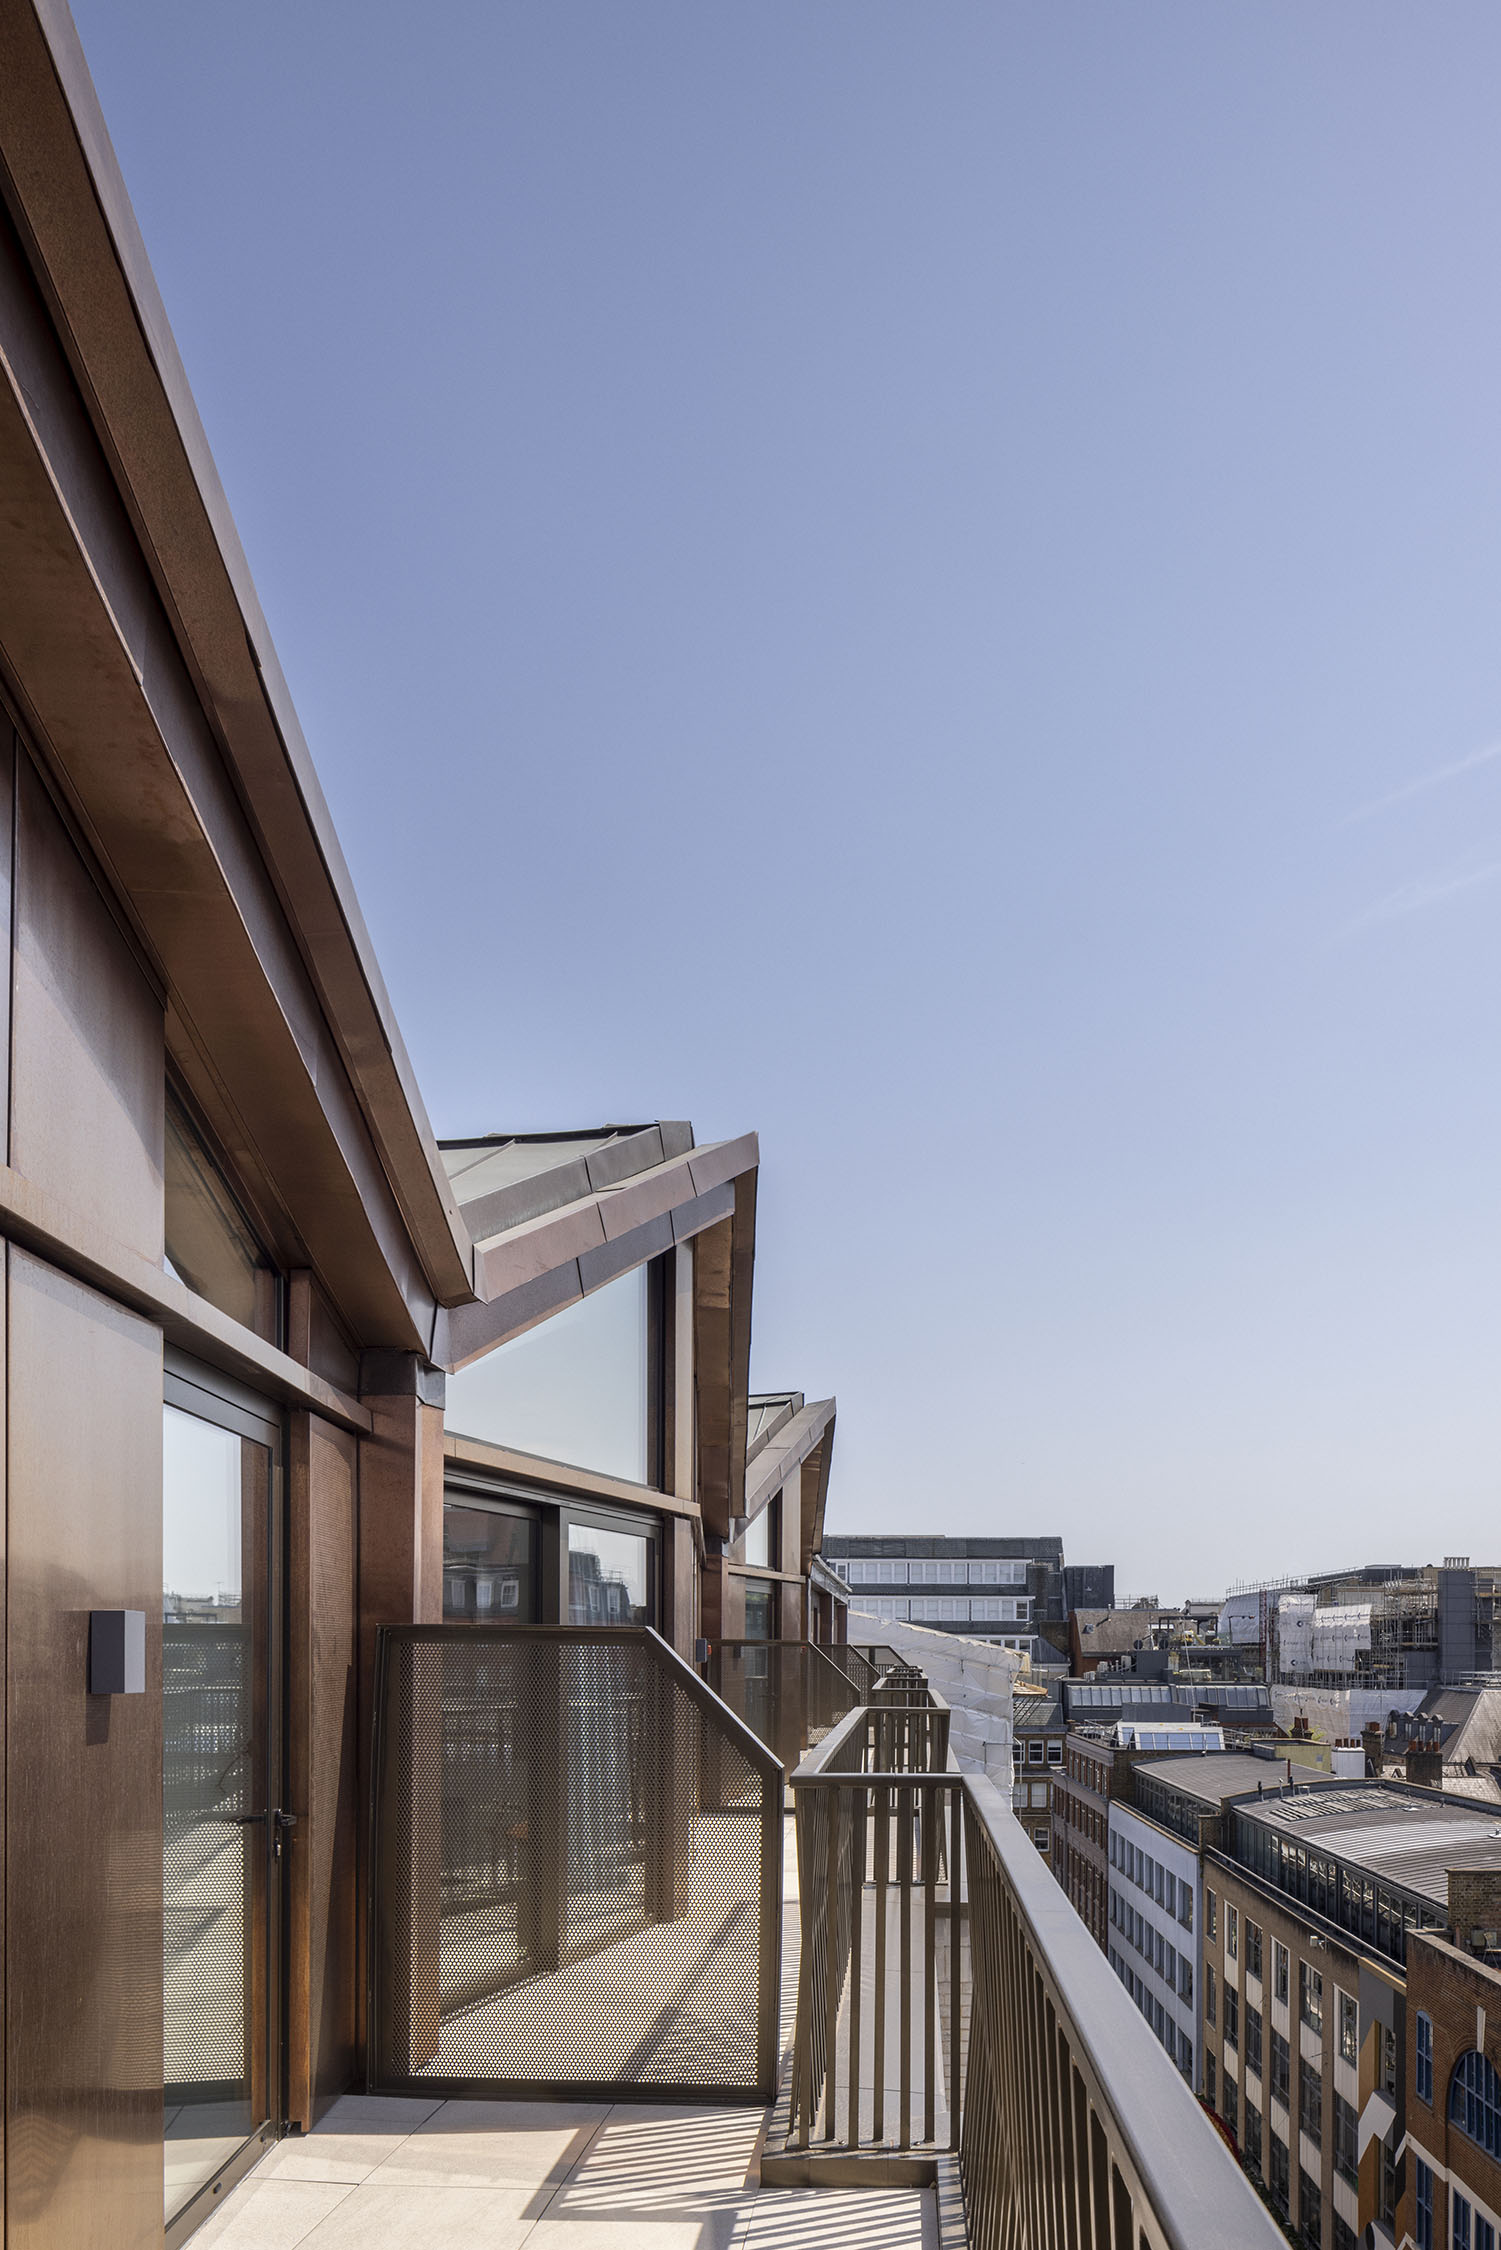 Adaptive reuse of existing buildings is an essential strategy to reduce embodied carbon, while regenerating our urban environments. An exemplar of this approach – 72 Broadwick Street – is crowned by a profiled roofscape clad in Nordic Brown Light copper from Aurubis.